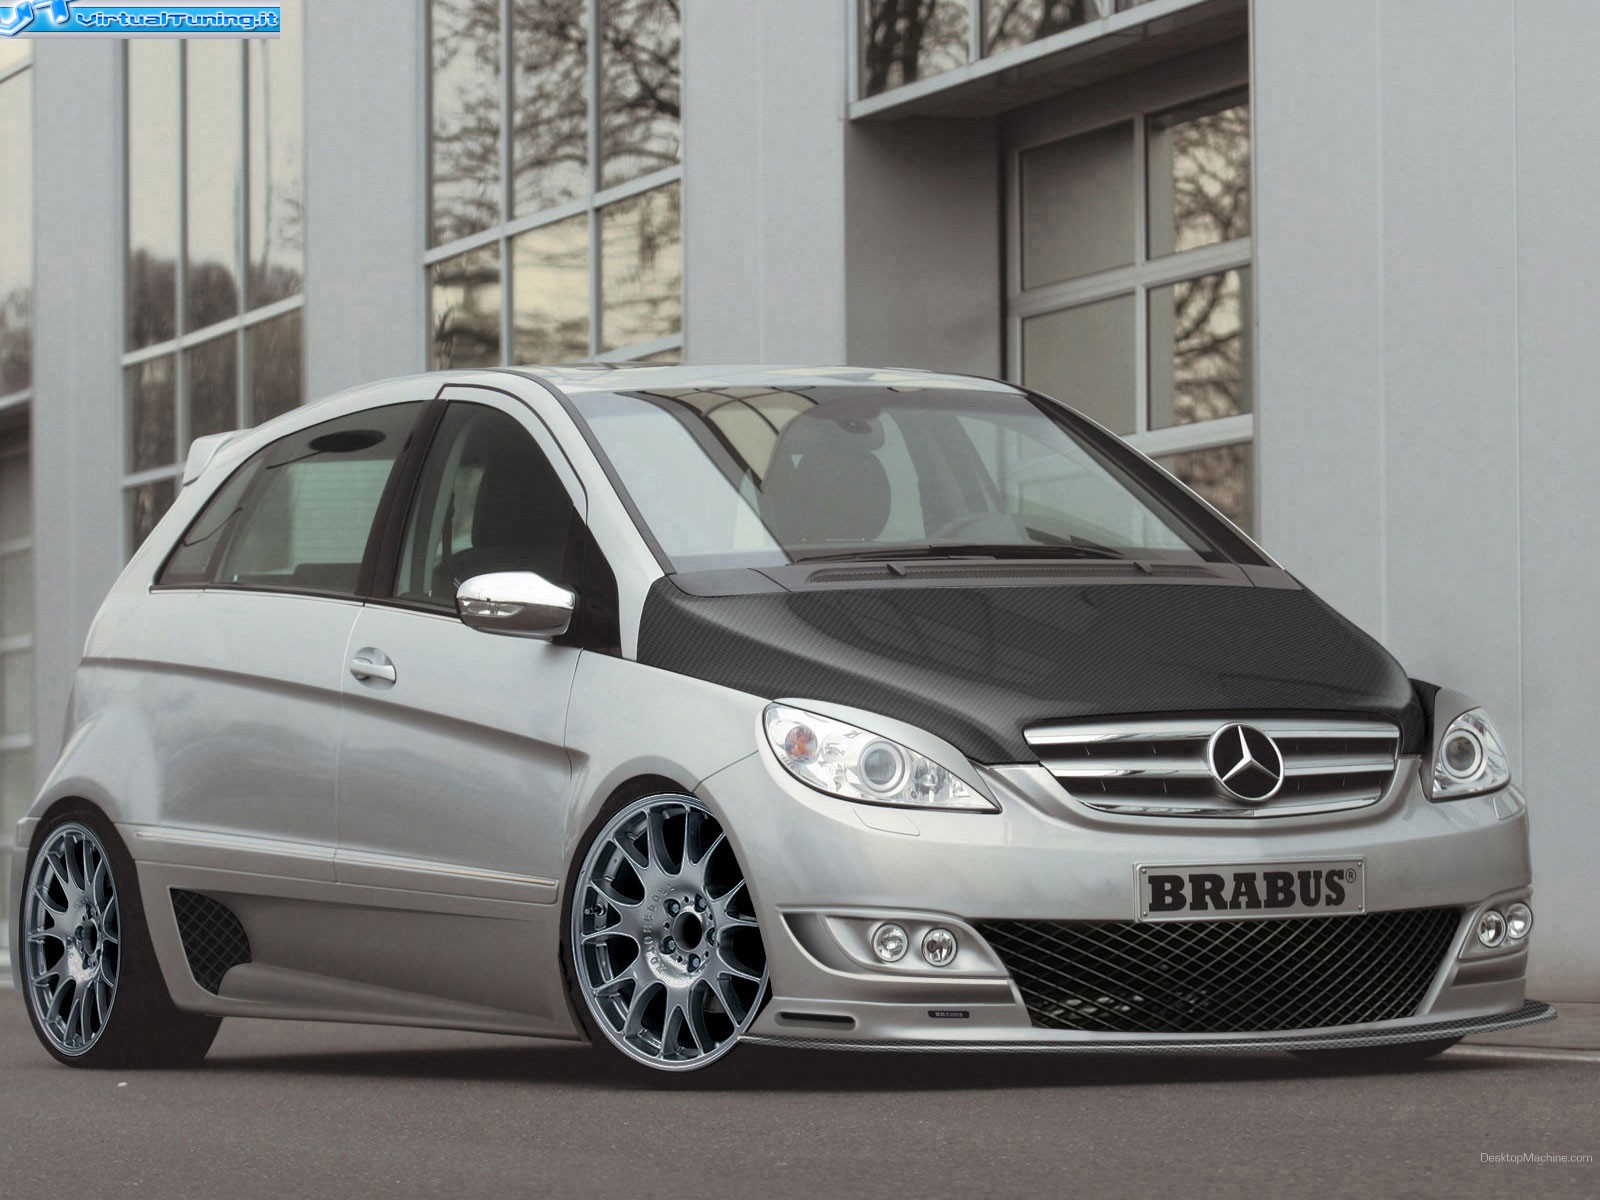 VirtualTuning MERCEDES Classe B by andyx73